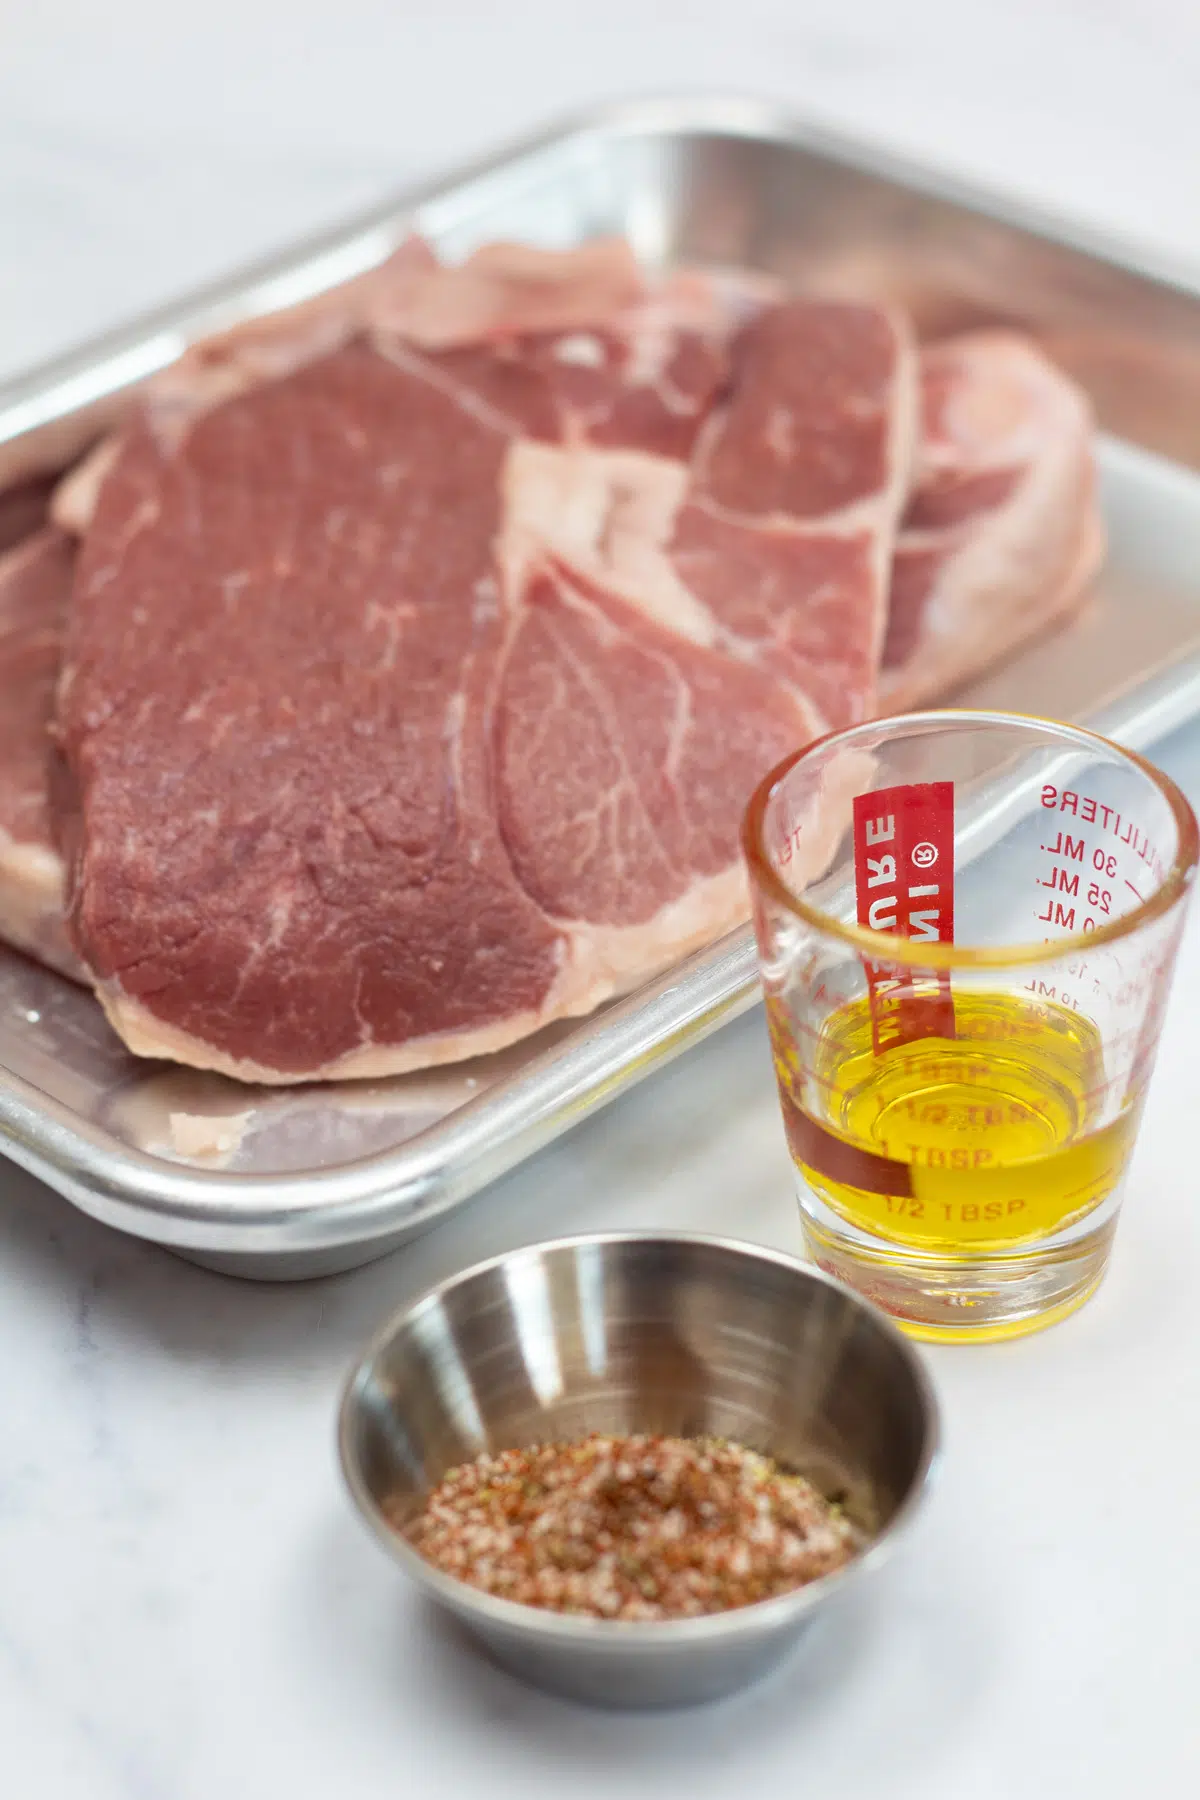 Tall photo showing ingredients needed for grilled lamb steaks.